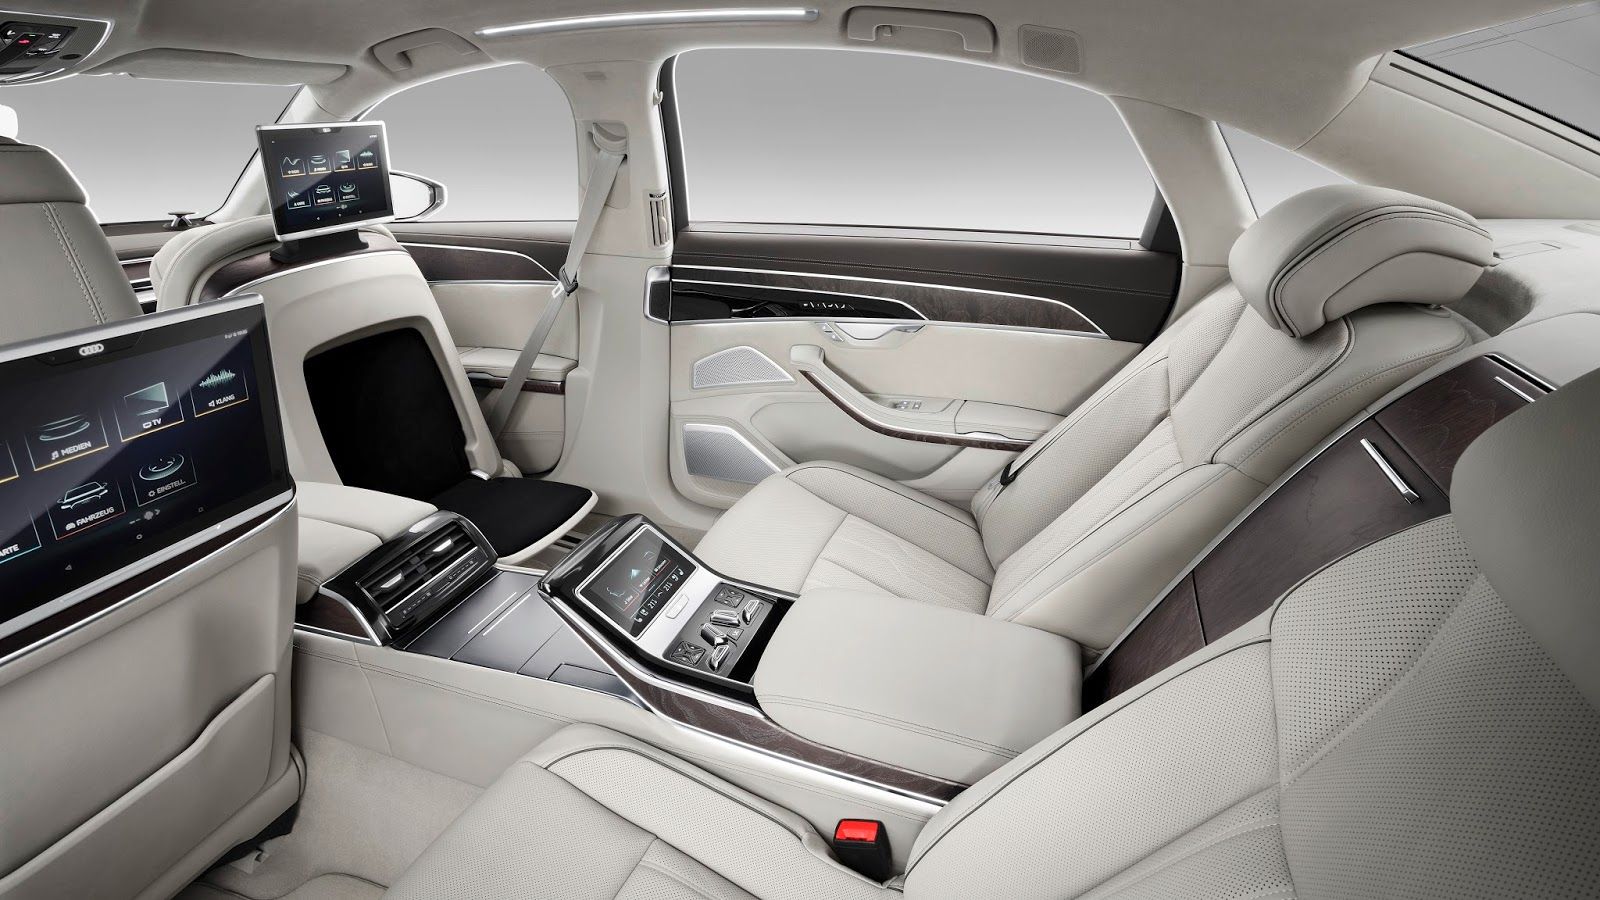 What Car Has The Most Comfortable Seats?